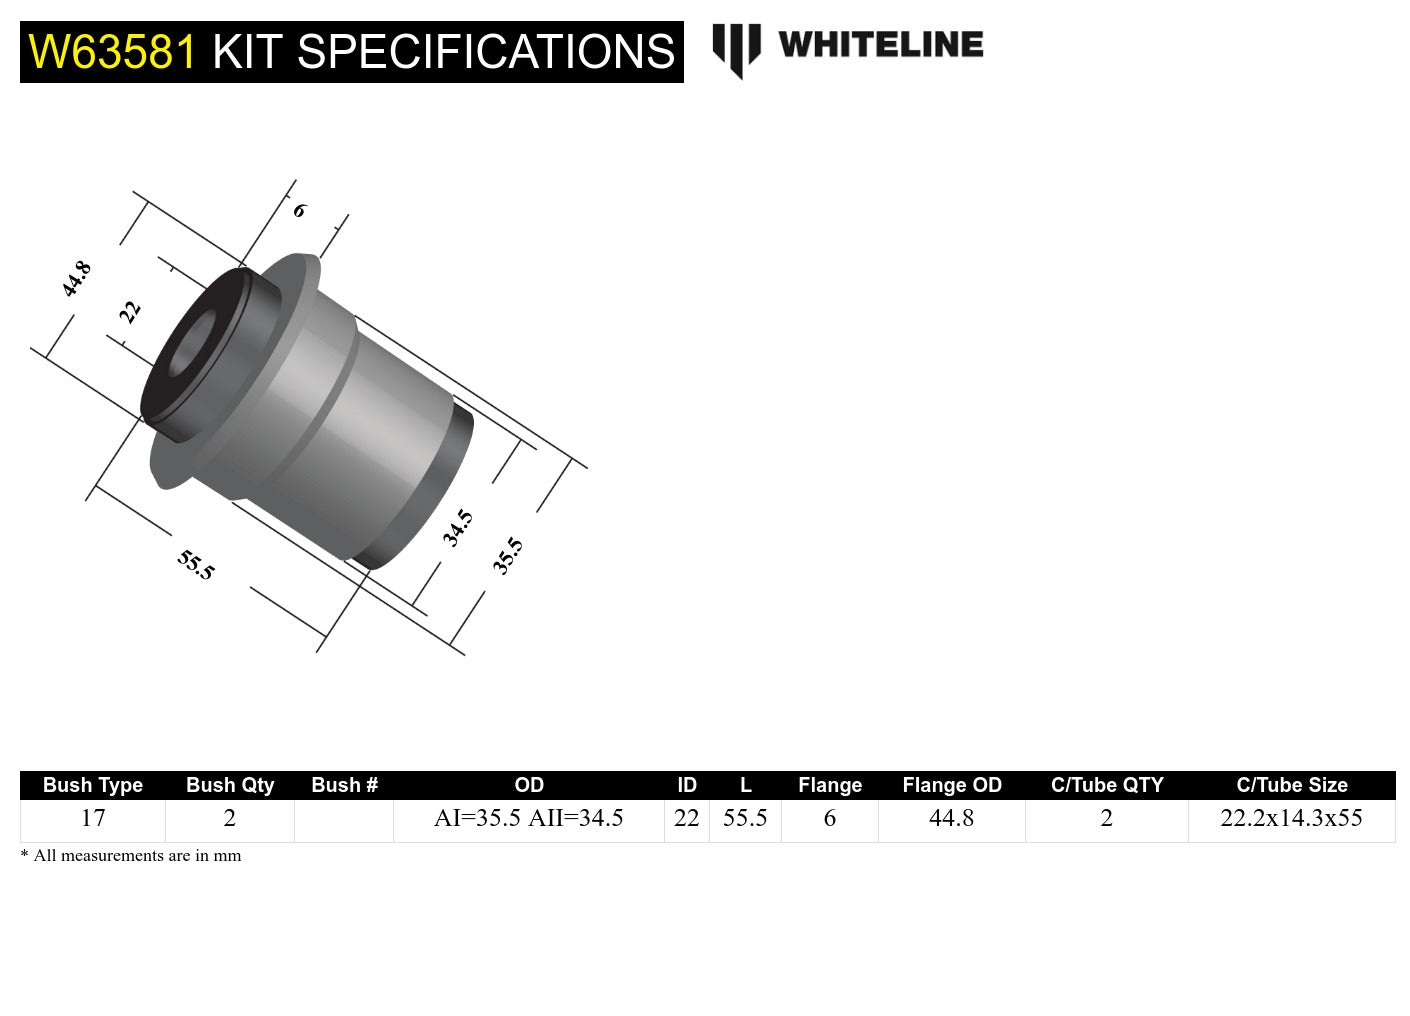 Rear Control Arm Lower Rear - Inner Bushing Kit to Suit Lexus IS 200, 250 and 350 (W63581)